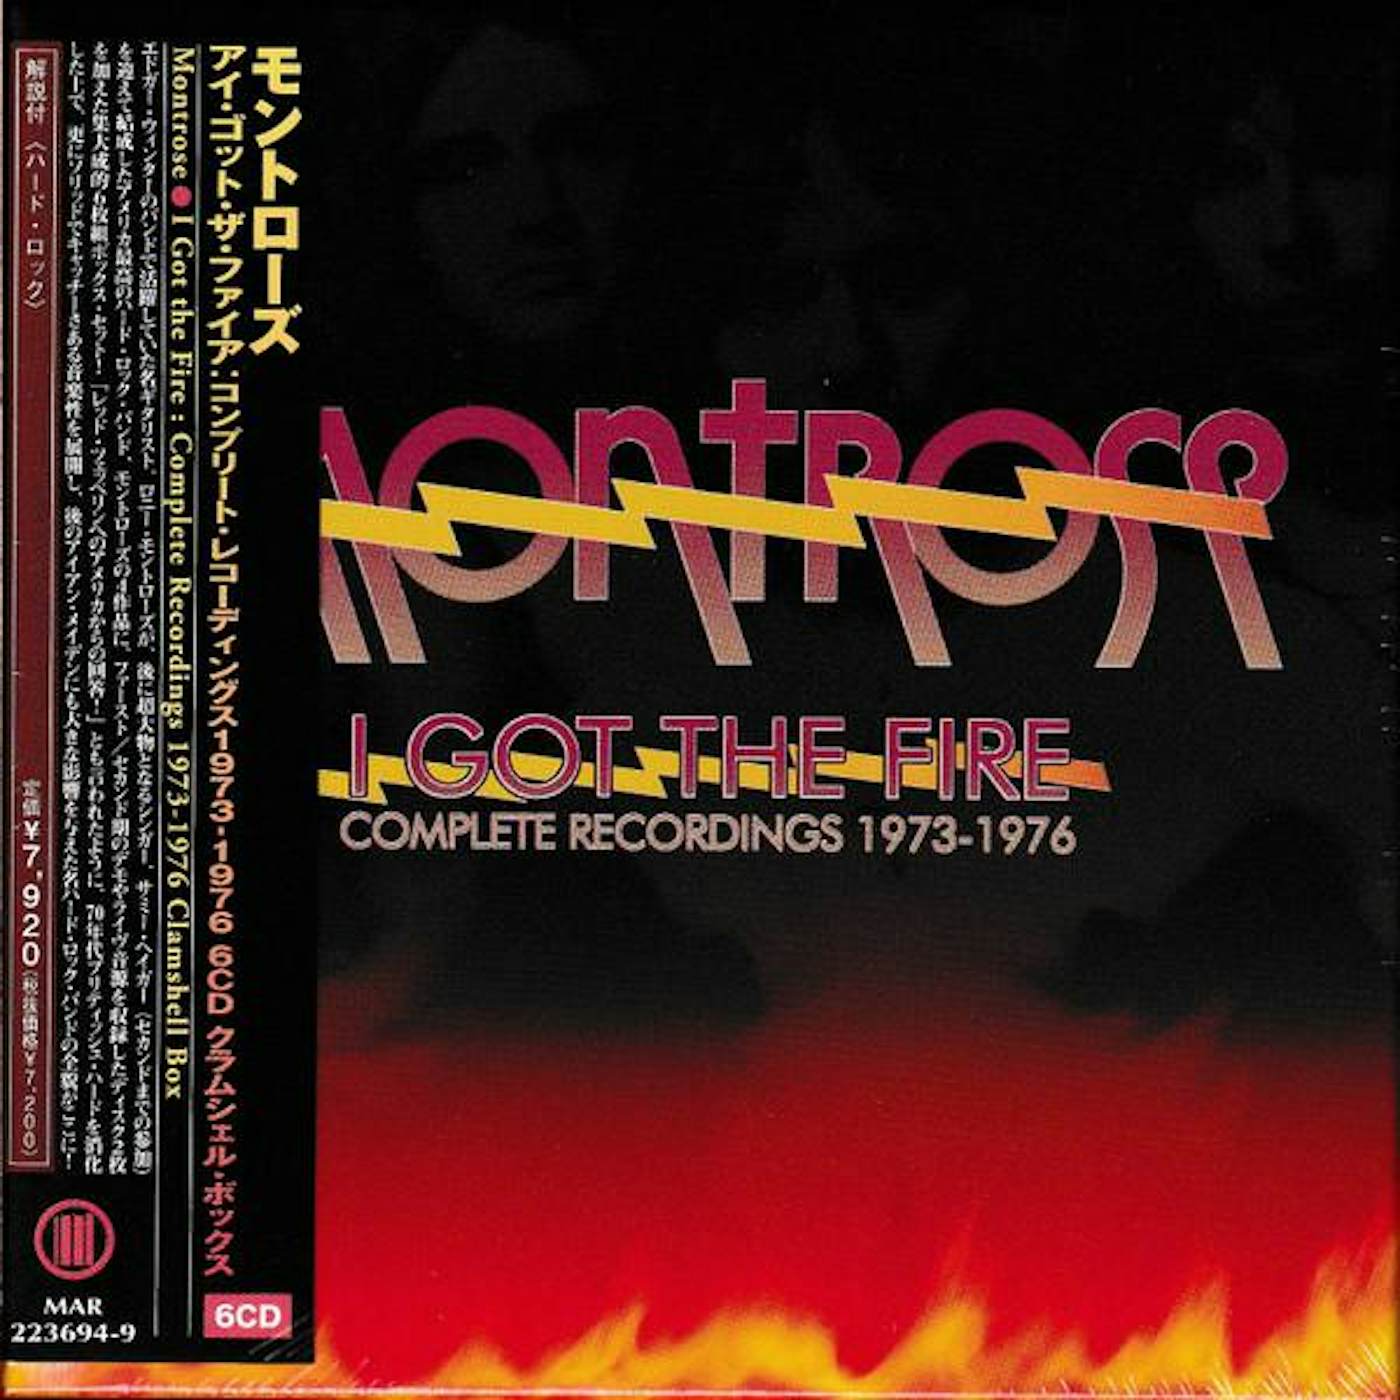 Montrose I GOT THE FIRE: COMPLETE RECORDINGS 1973-1976 (6CD) CD